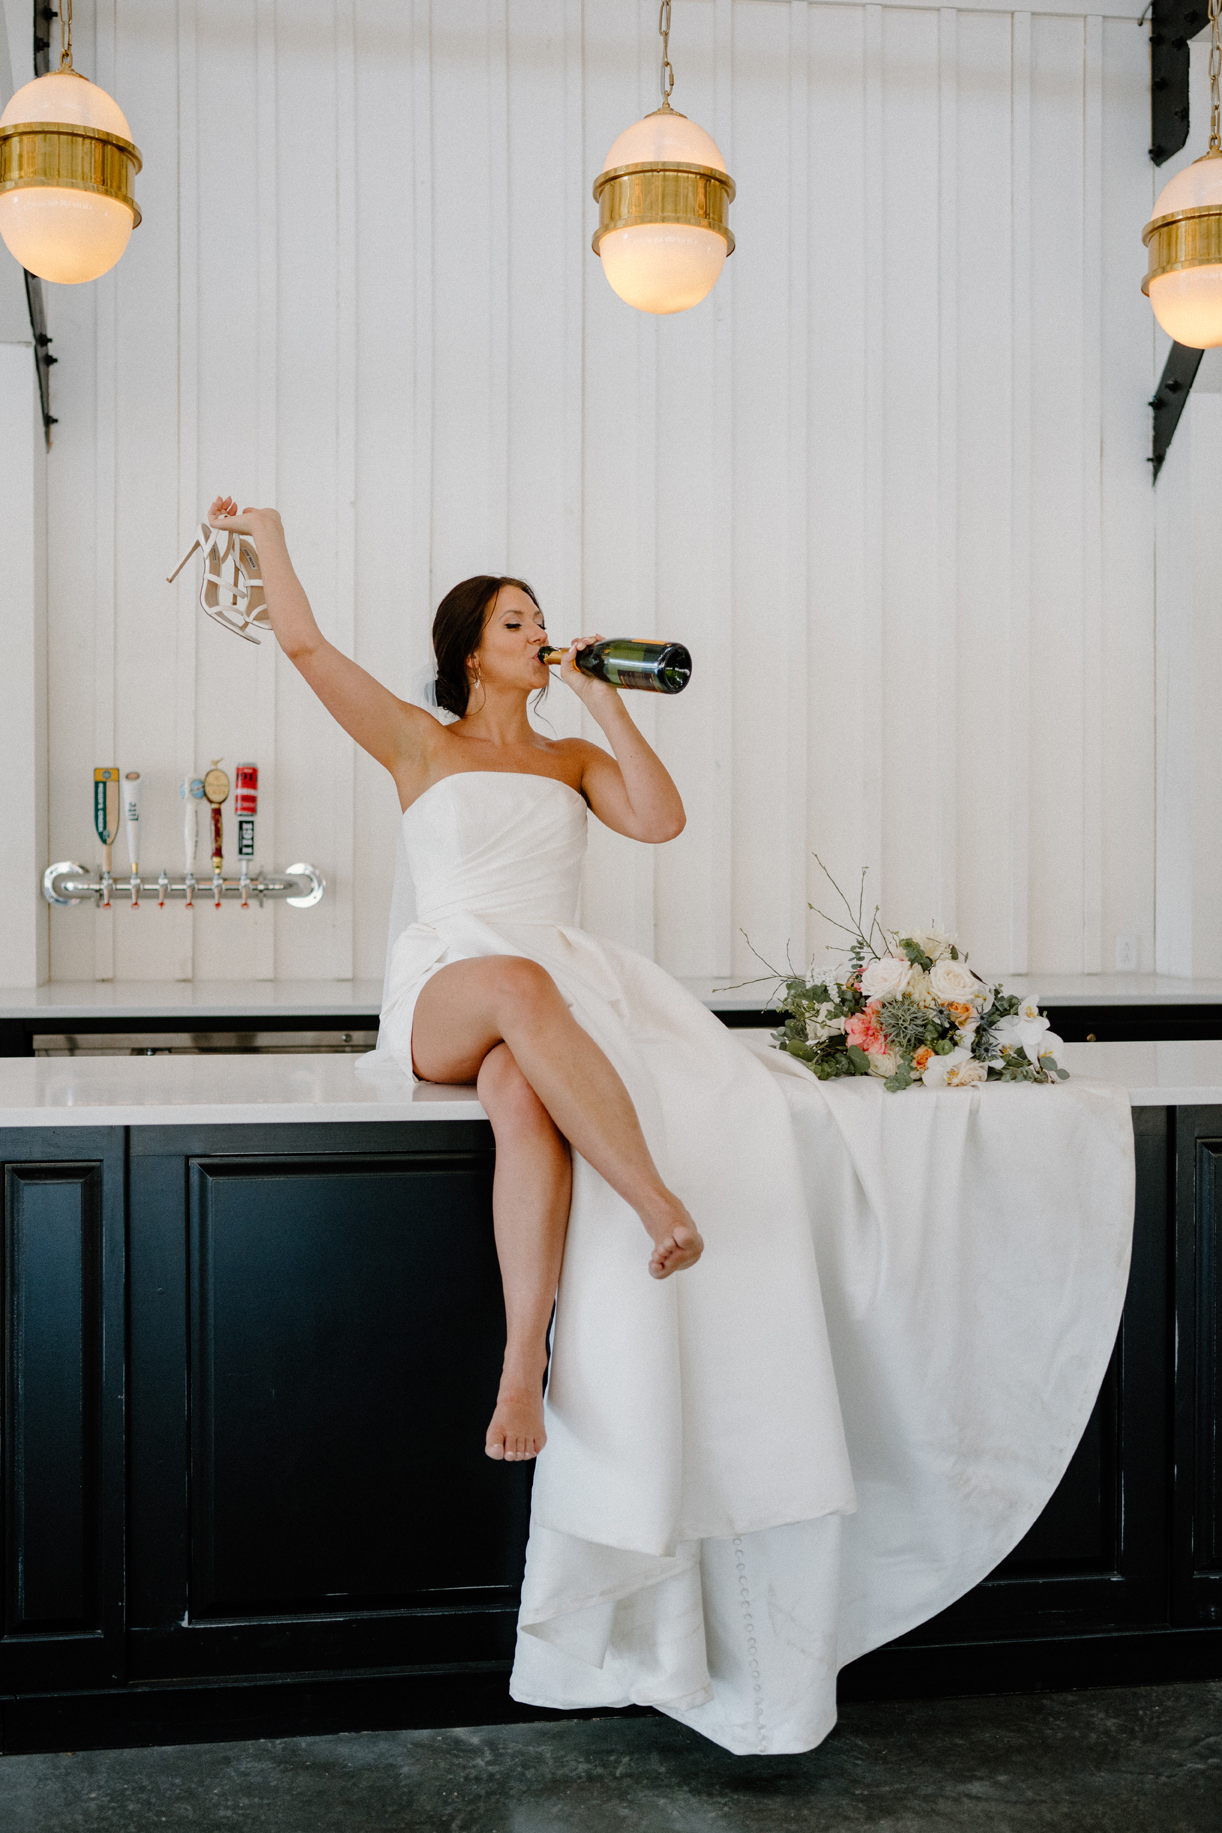 The bride takes a break at the bar